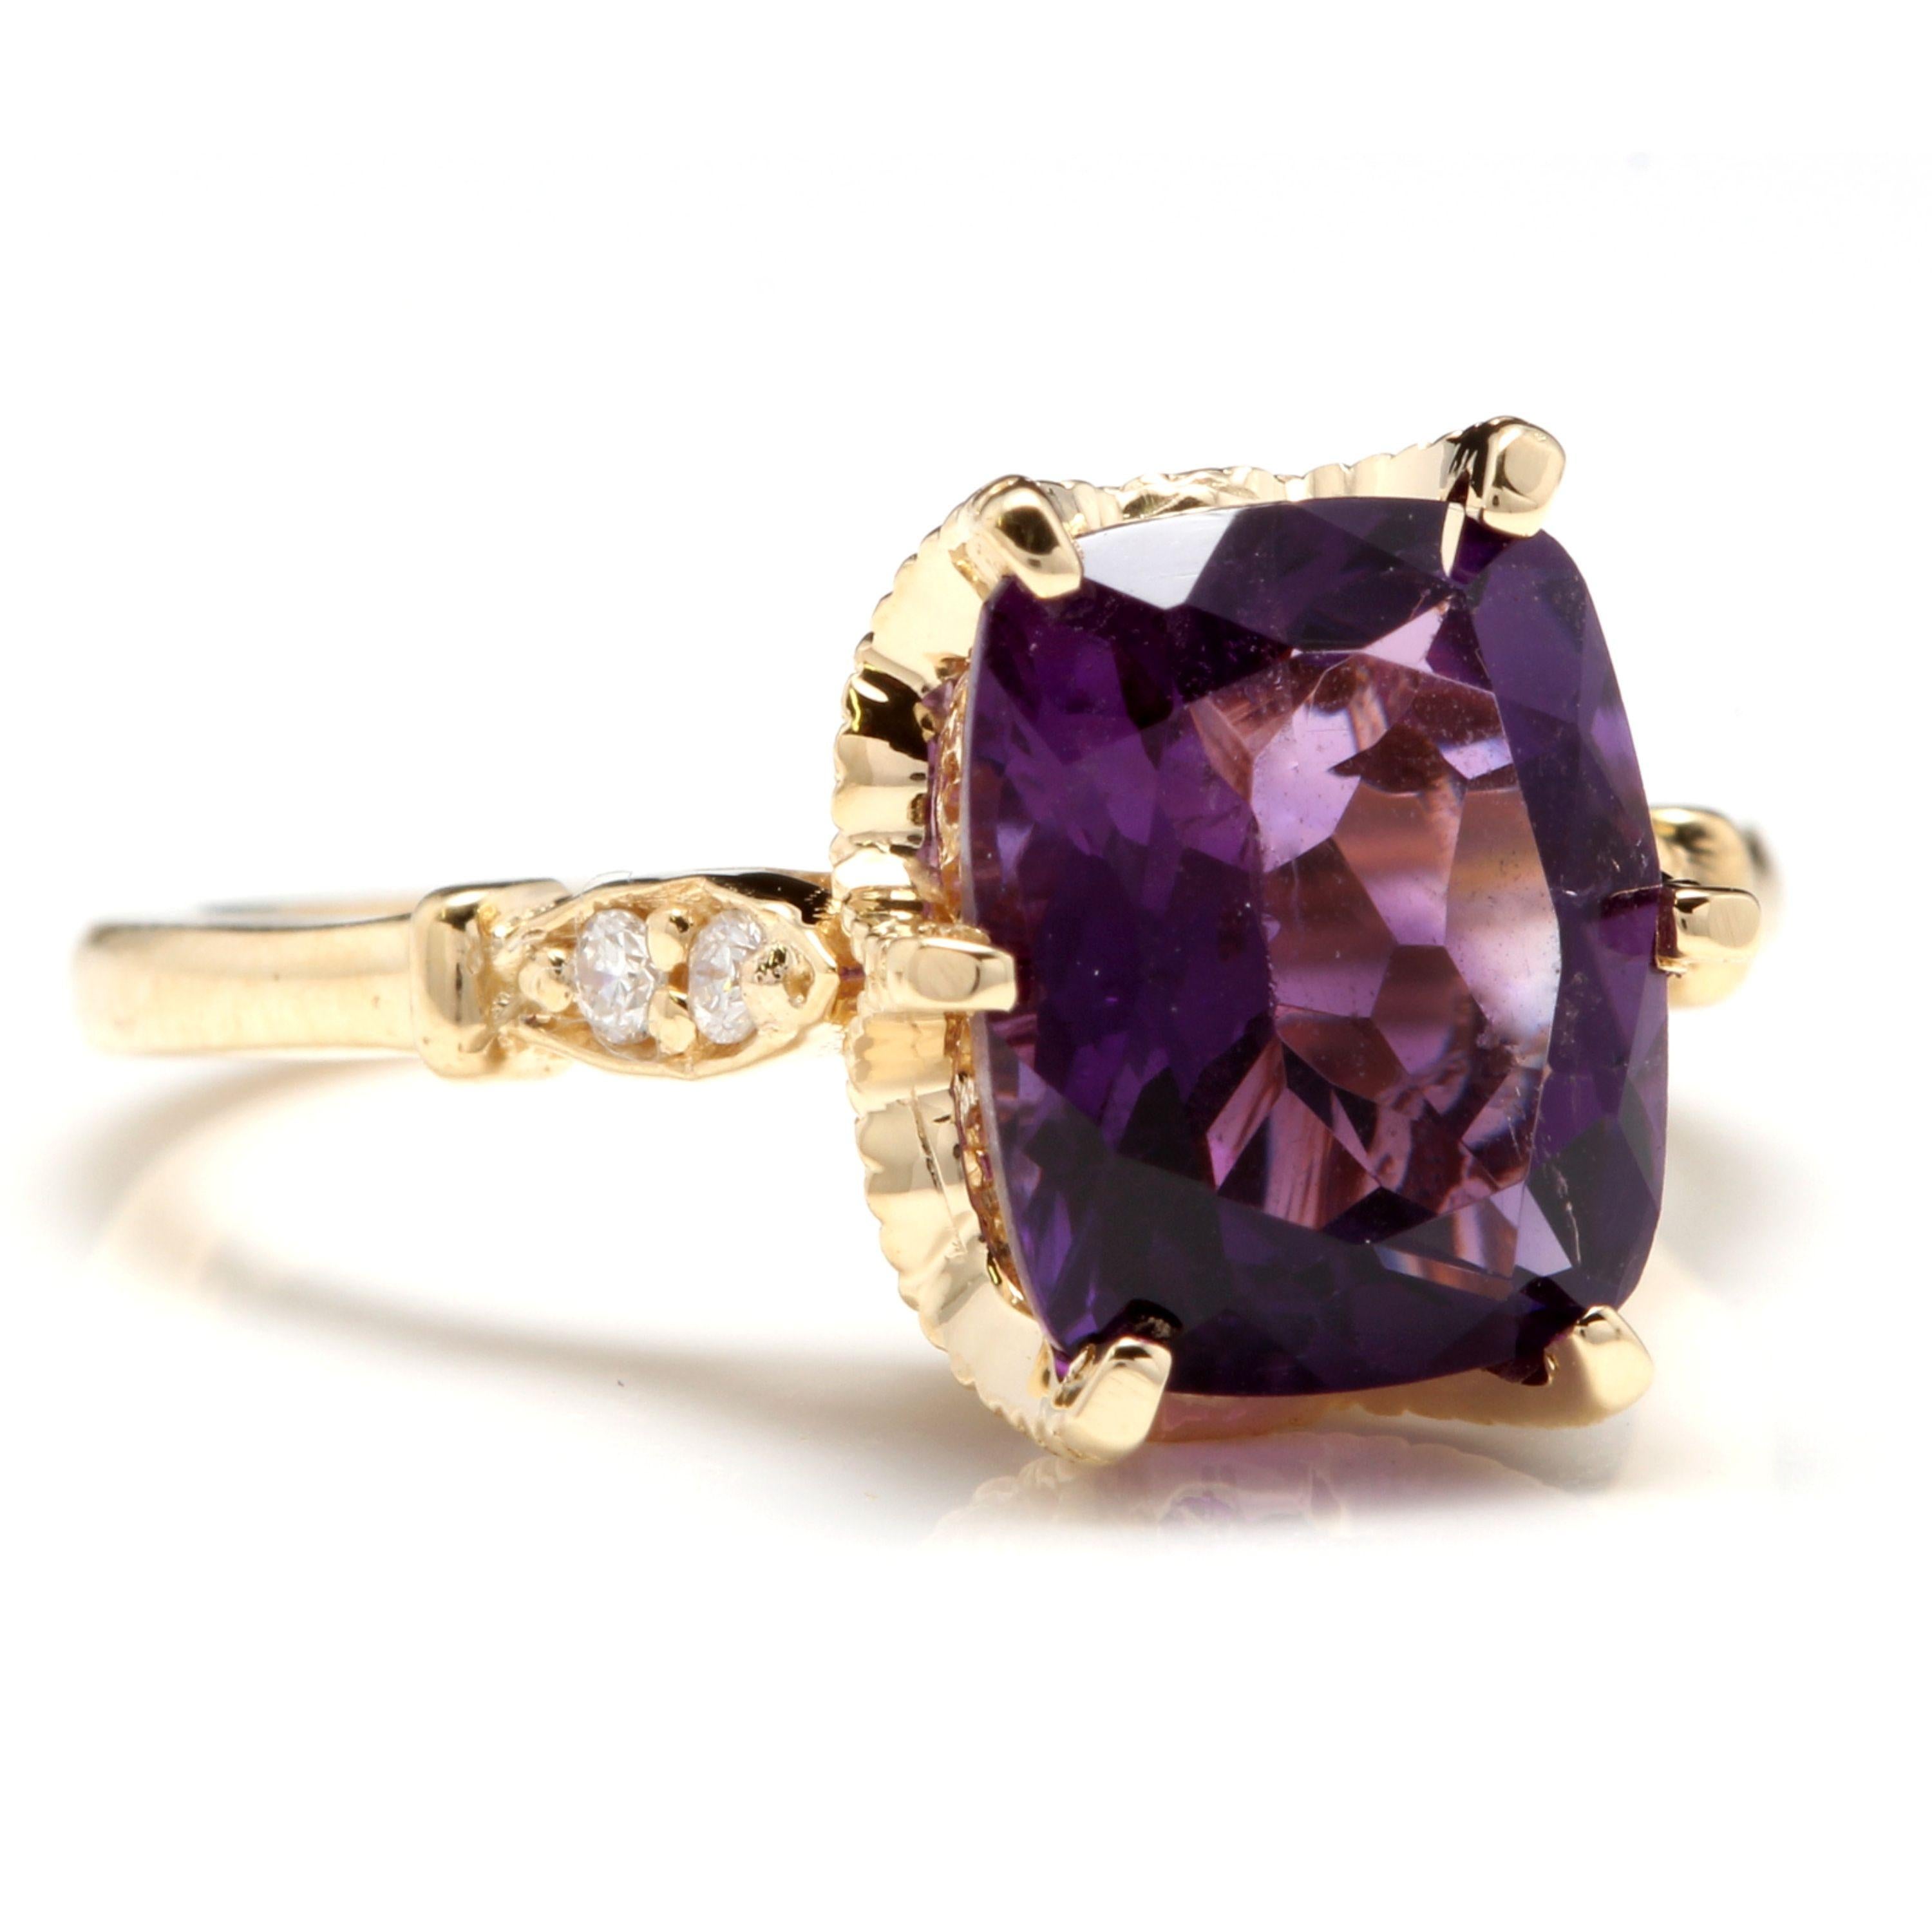 3.38 Carats Natural Amethyst and Diamond 14K Solid Yellow Gold Ring

Total Natural Cushion Shaped Amethyst Weights: Approx. 3.30 Carats

Amethyst Measures: Approx. 10 x 8mm

Natural Round Diamonds Weight: Approx. 0.08 Carats (color G-H / Clarity